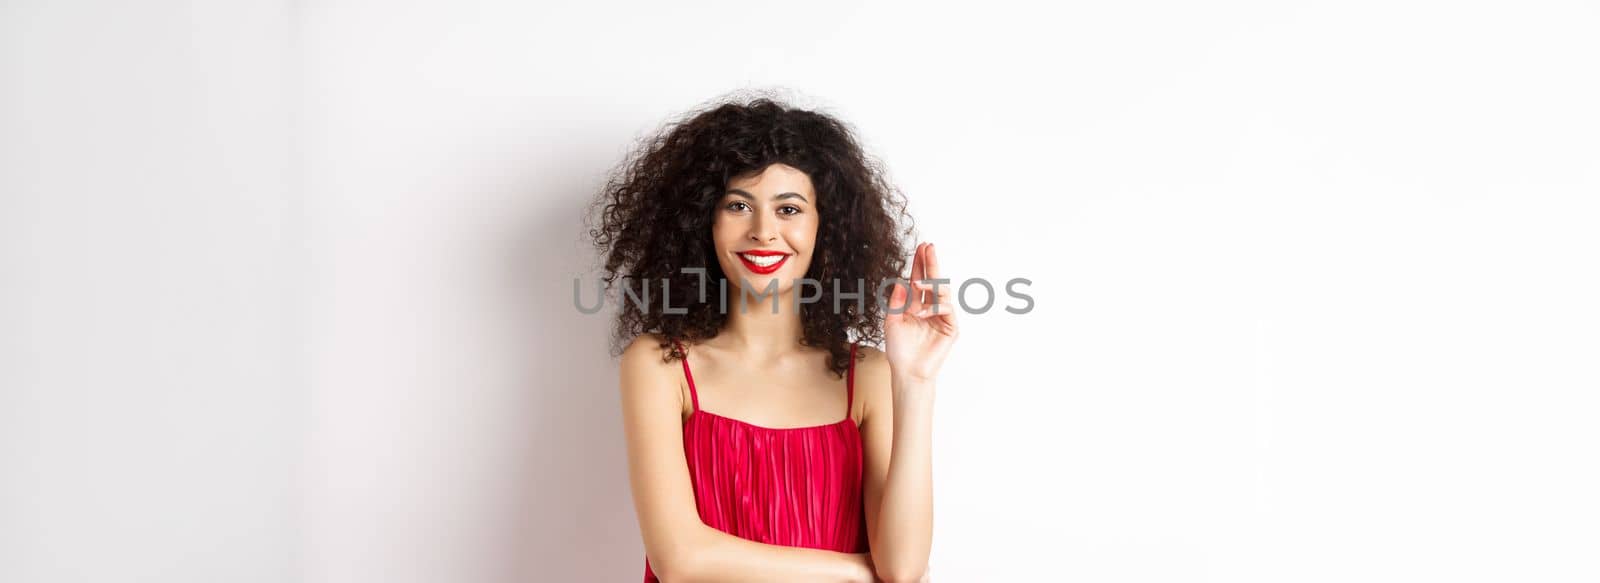 Beauty and fashion. Smiling woman with curly hair and makeup, wearing red dress, waving hand in greeting gesture, saying hello, standing on white background by Benzoix